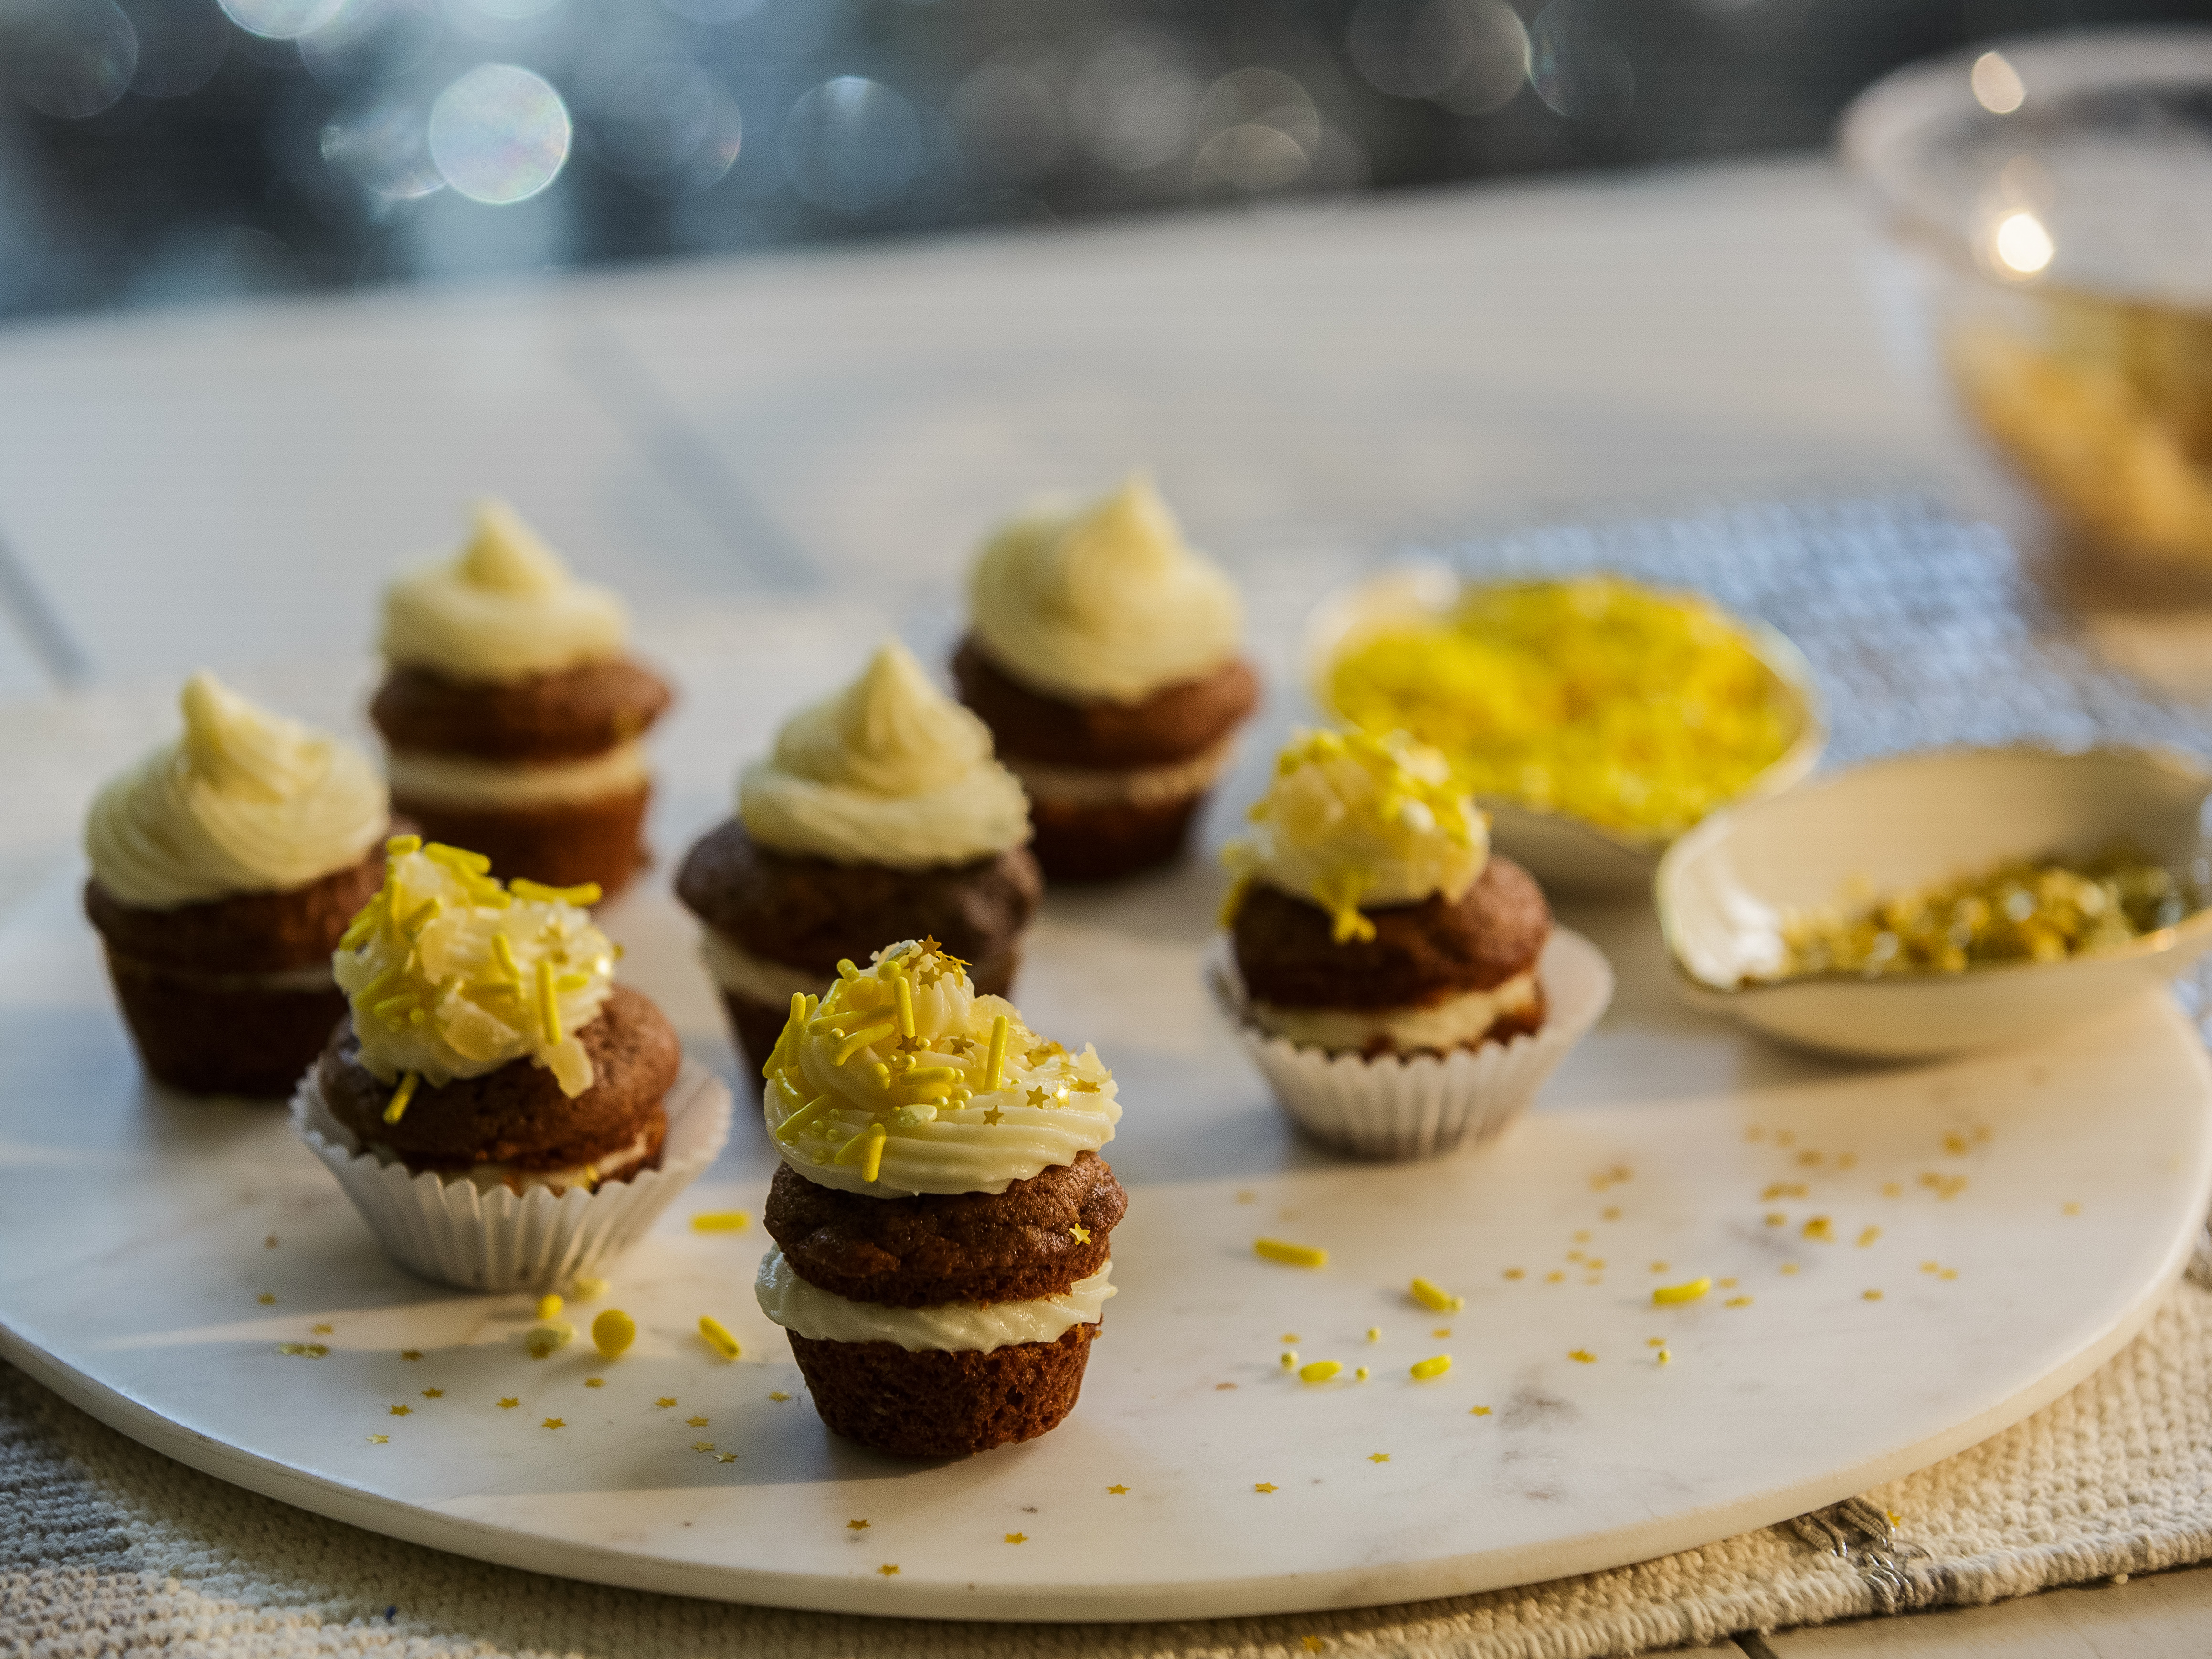 https://www.foodnetwork.com/content/dam/images/food/fullset/2021/11/24/0/YW1710_spiced-gingerbread-mini-cupcakes_s4x3.jpg